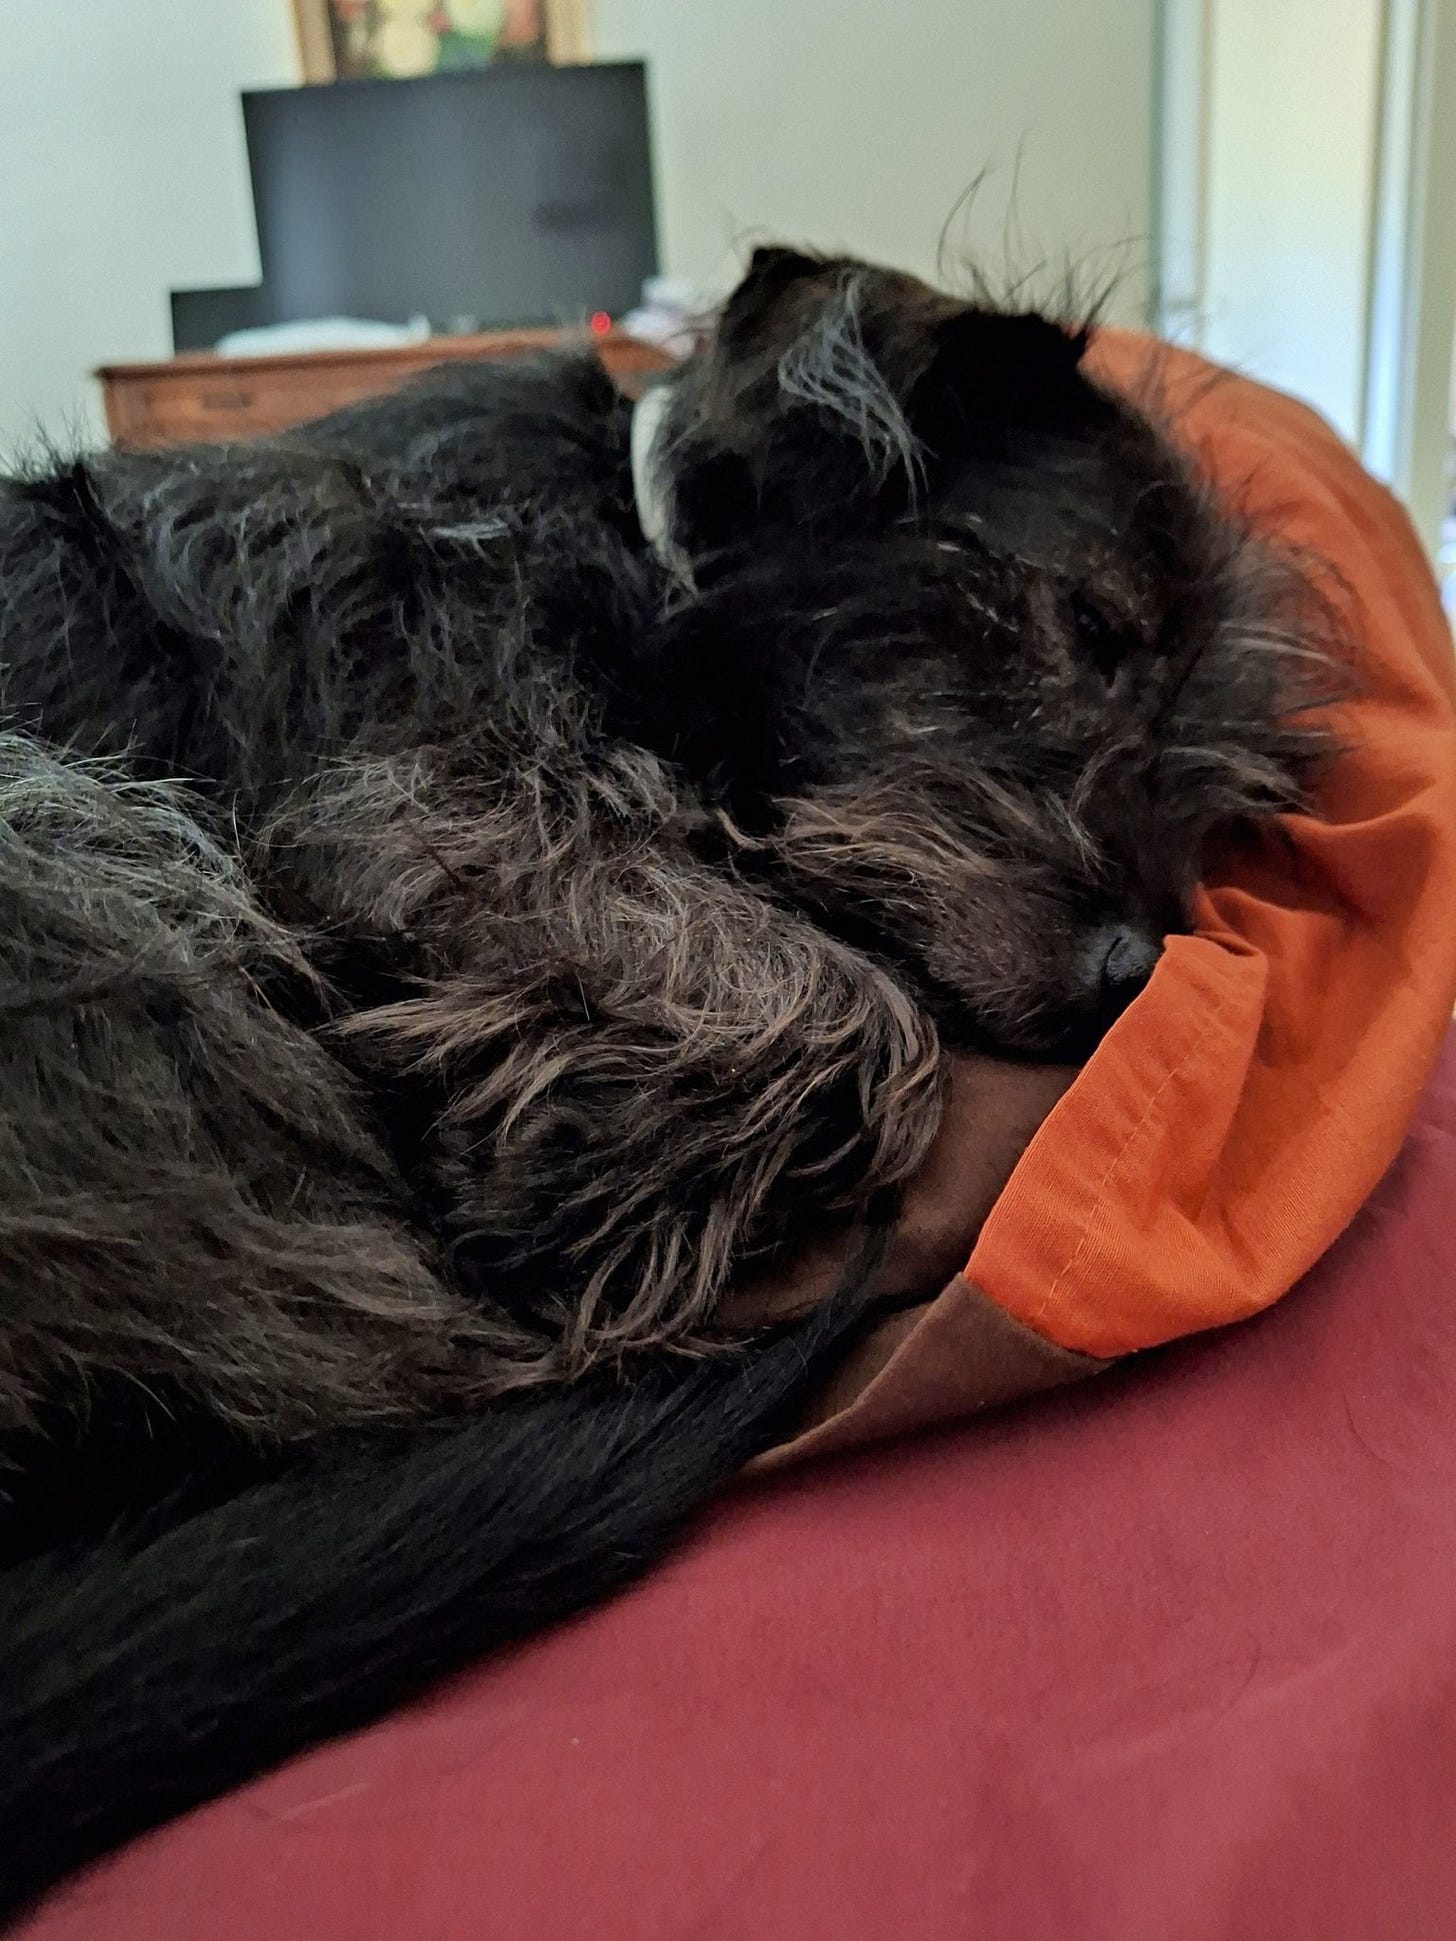 A small black dog sleeps cozily over an orange and black pillow